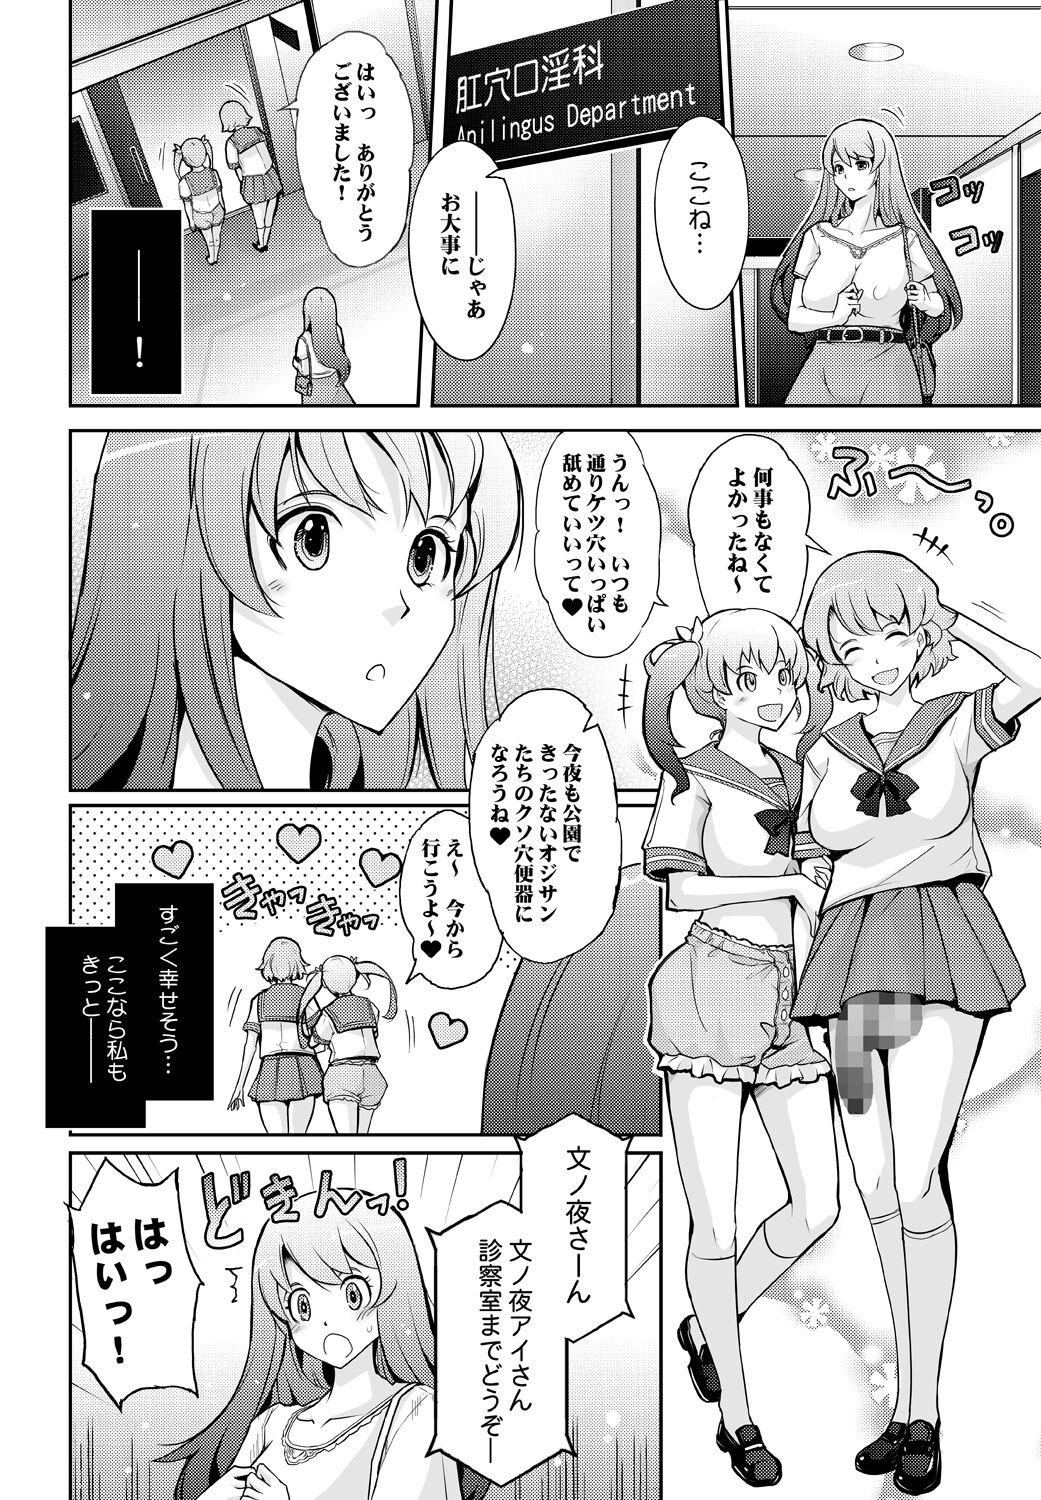 Spying 淫猥性癖全肯定クリニック 肛穴口淫科 - Original Transexual - Page 6